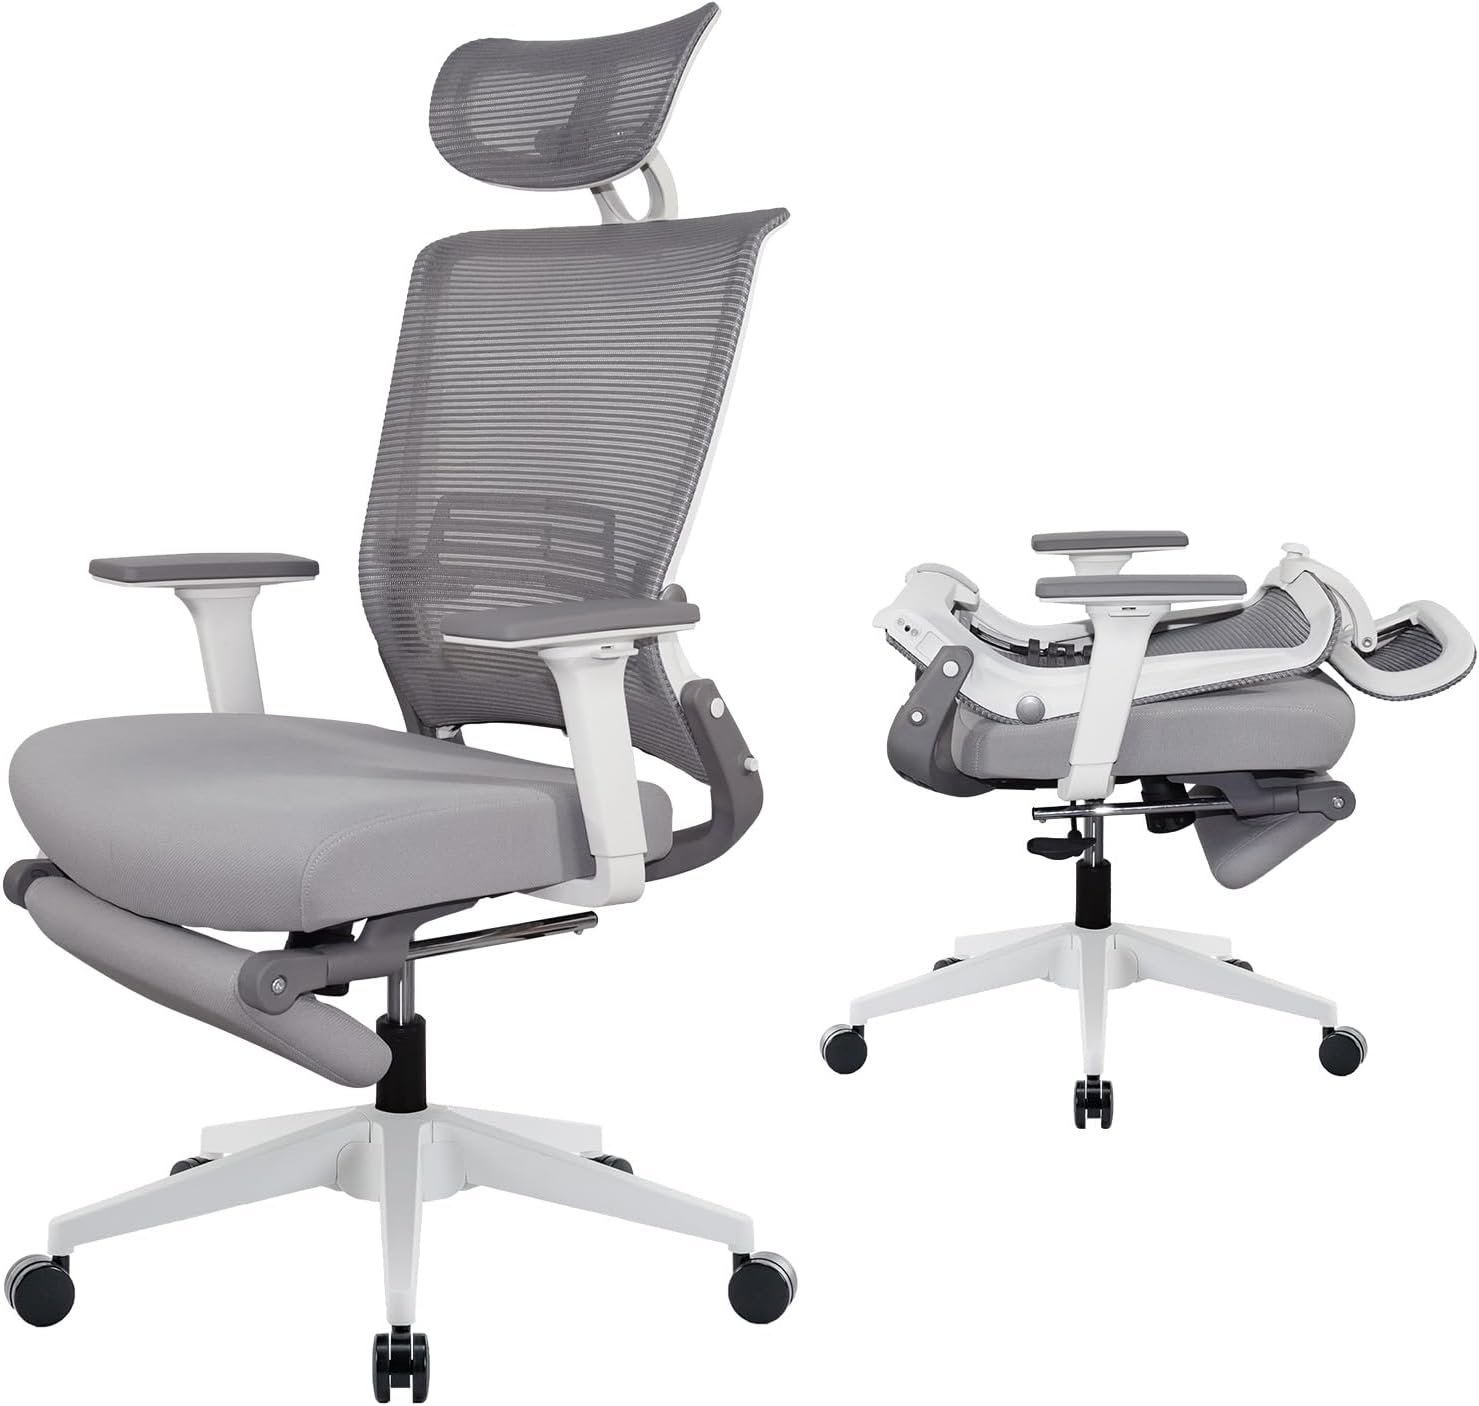 Foldable Ergonomic Office Chair with Footrest, High Back Computer Chair with 2D Headrest, Mesh Back, Sponge Seat, Adjustable Lumbar Support, 2D Armrest, Home Office Desk Chair, Cream